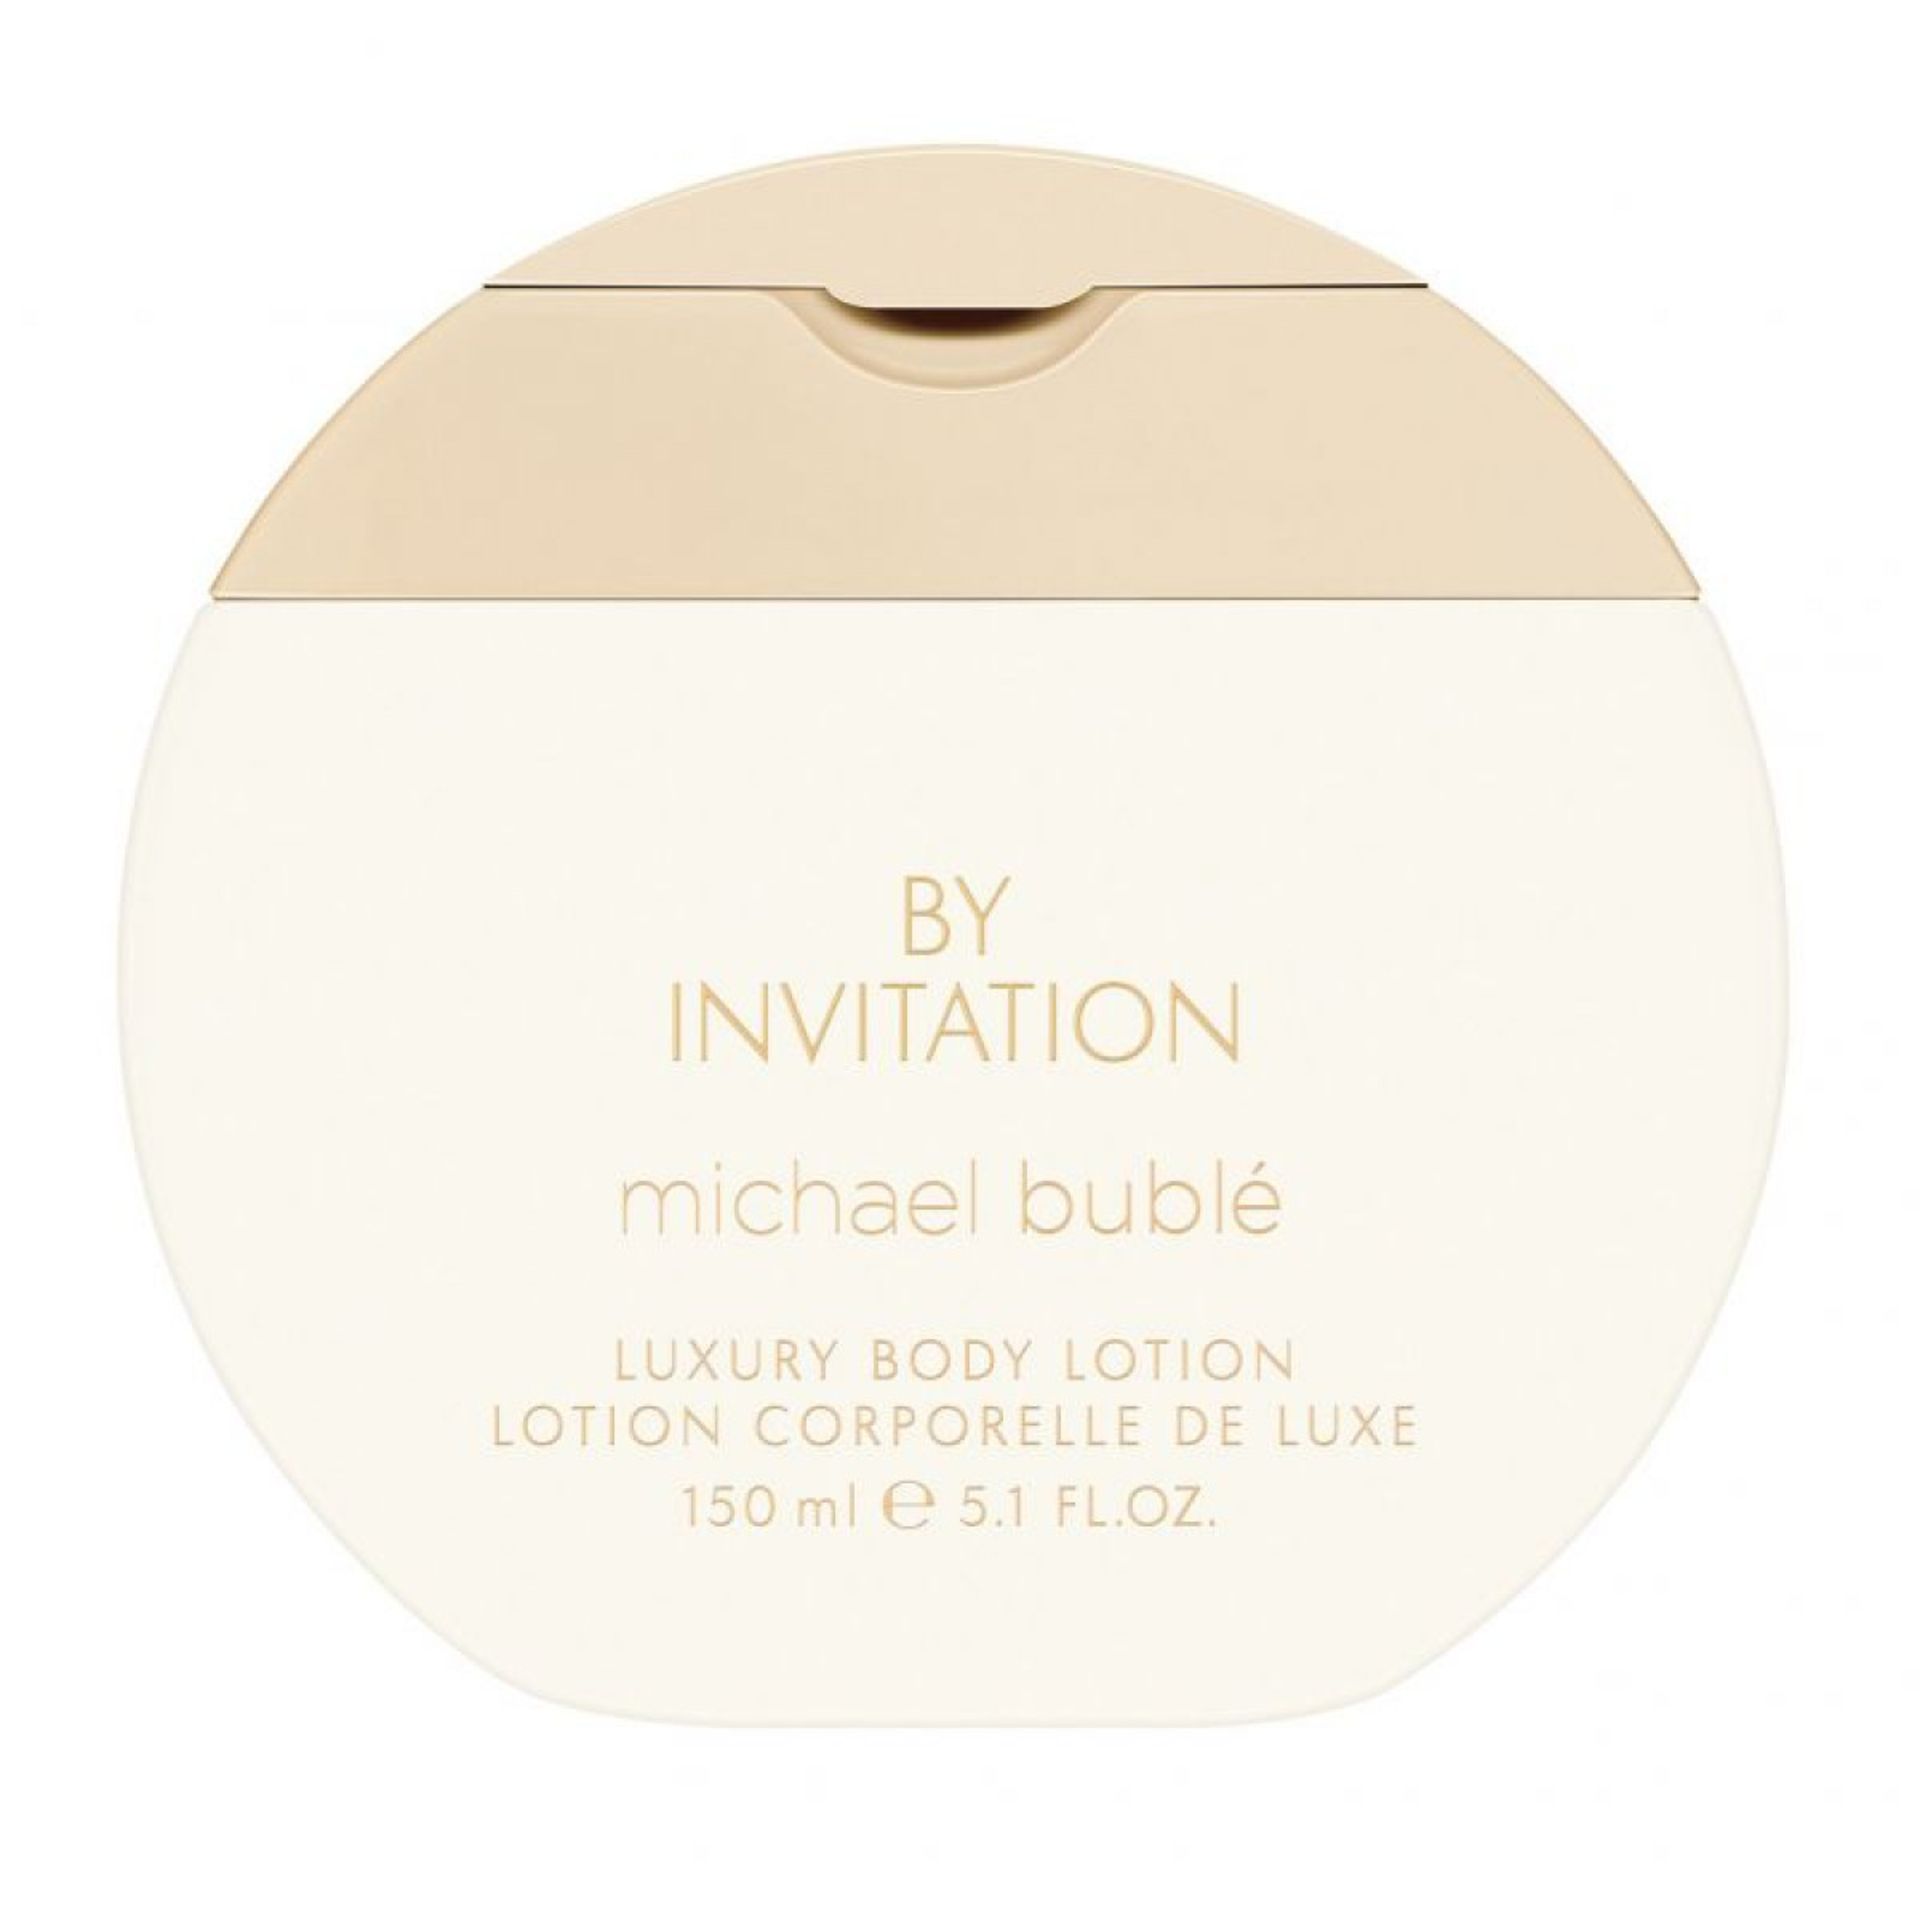 V Brand New Michael Buble - By Invitation Body Lotion 150ml ISP Price £14.50 (The Fragrance